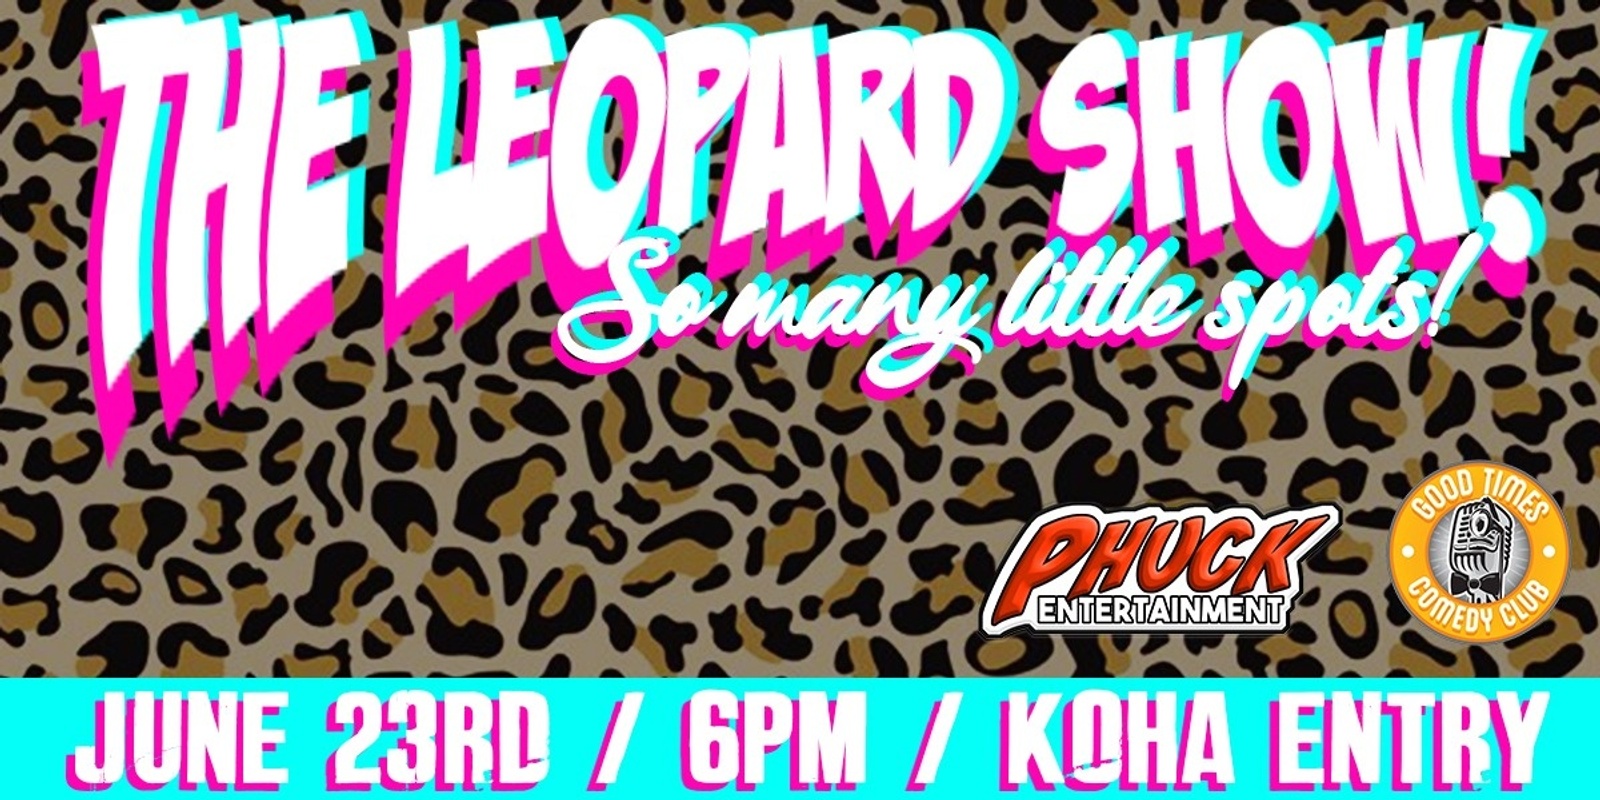 Banner image for The Leopard Show - So Many Little Spots!